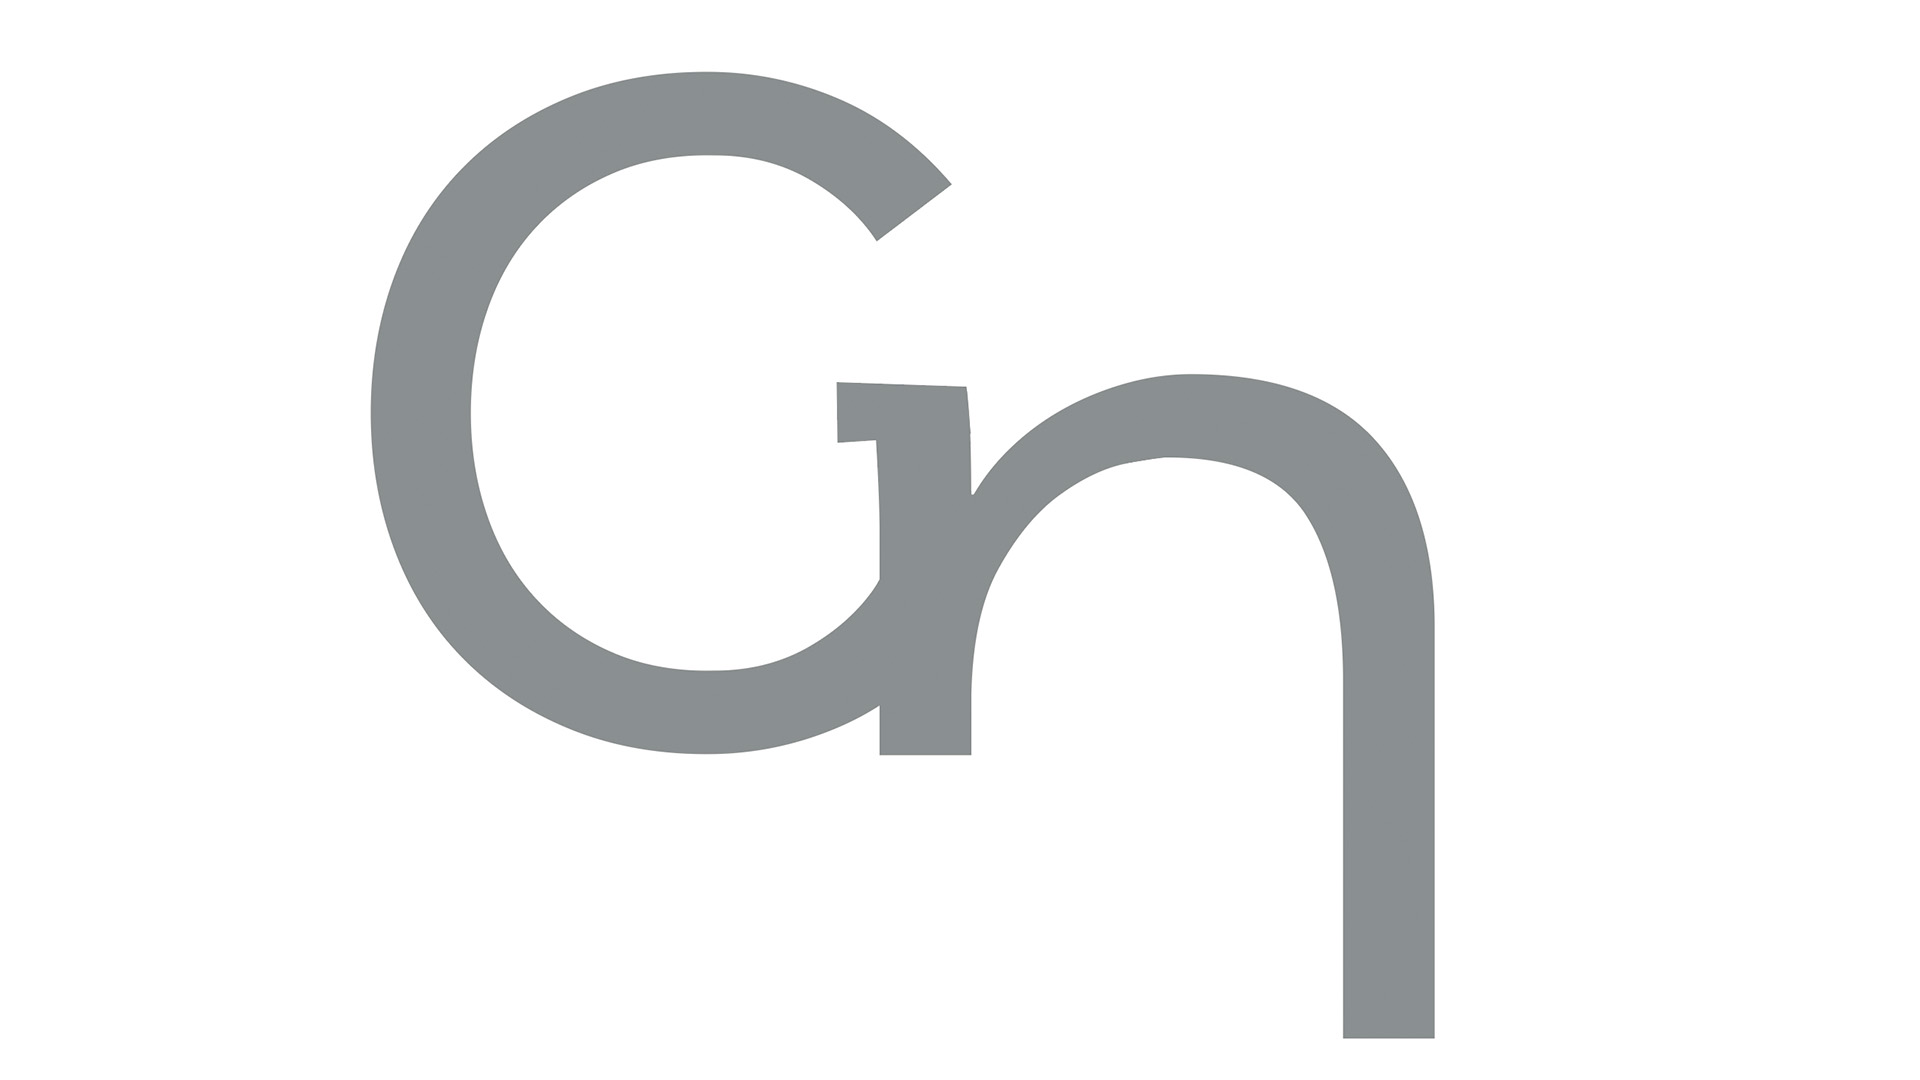 This is my personal logo brand "Gn"  / This is my personal logo brand "Gn" which stands for Grace Nation